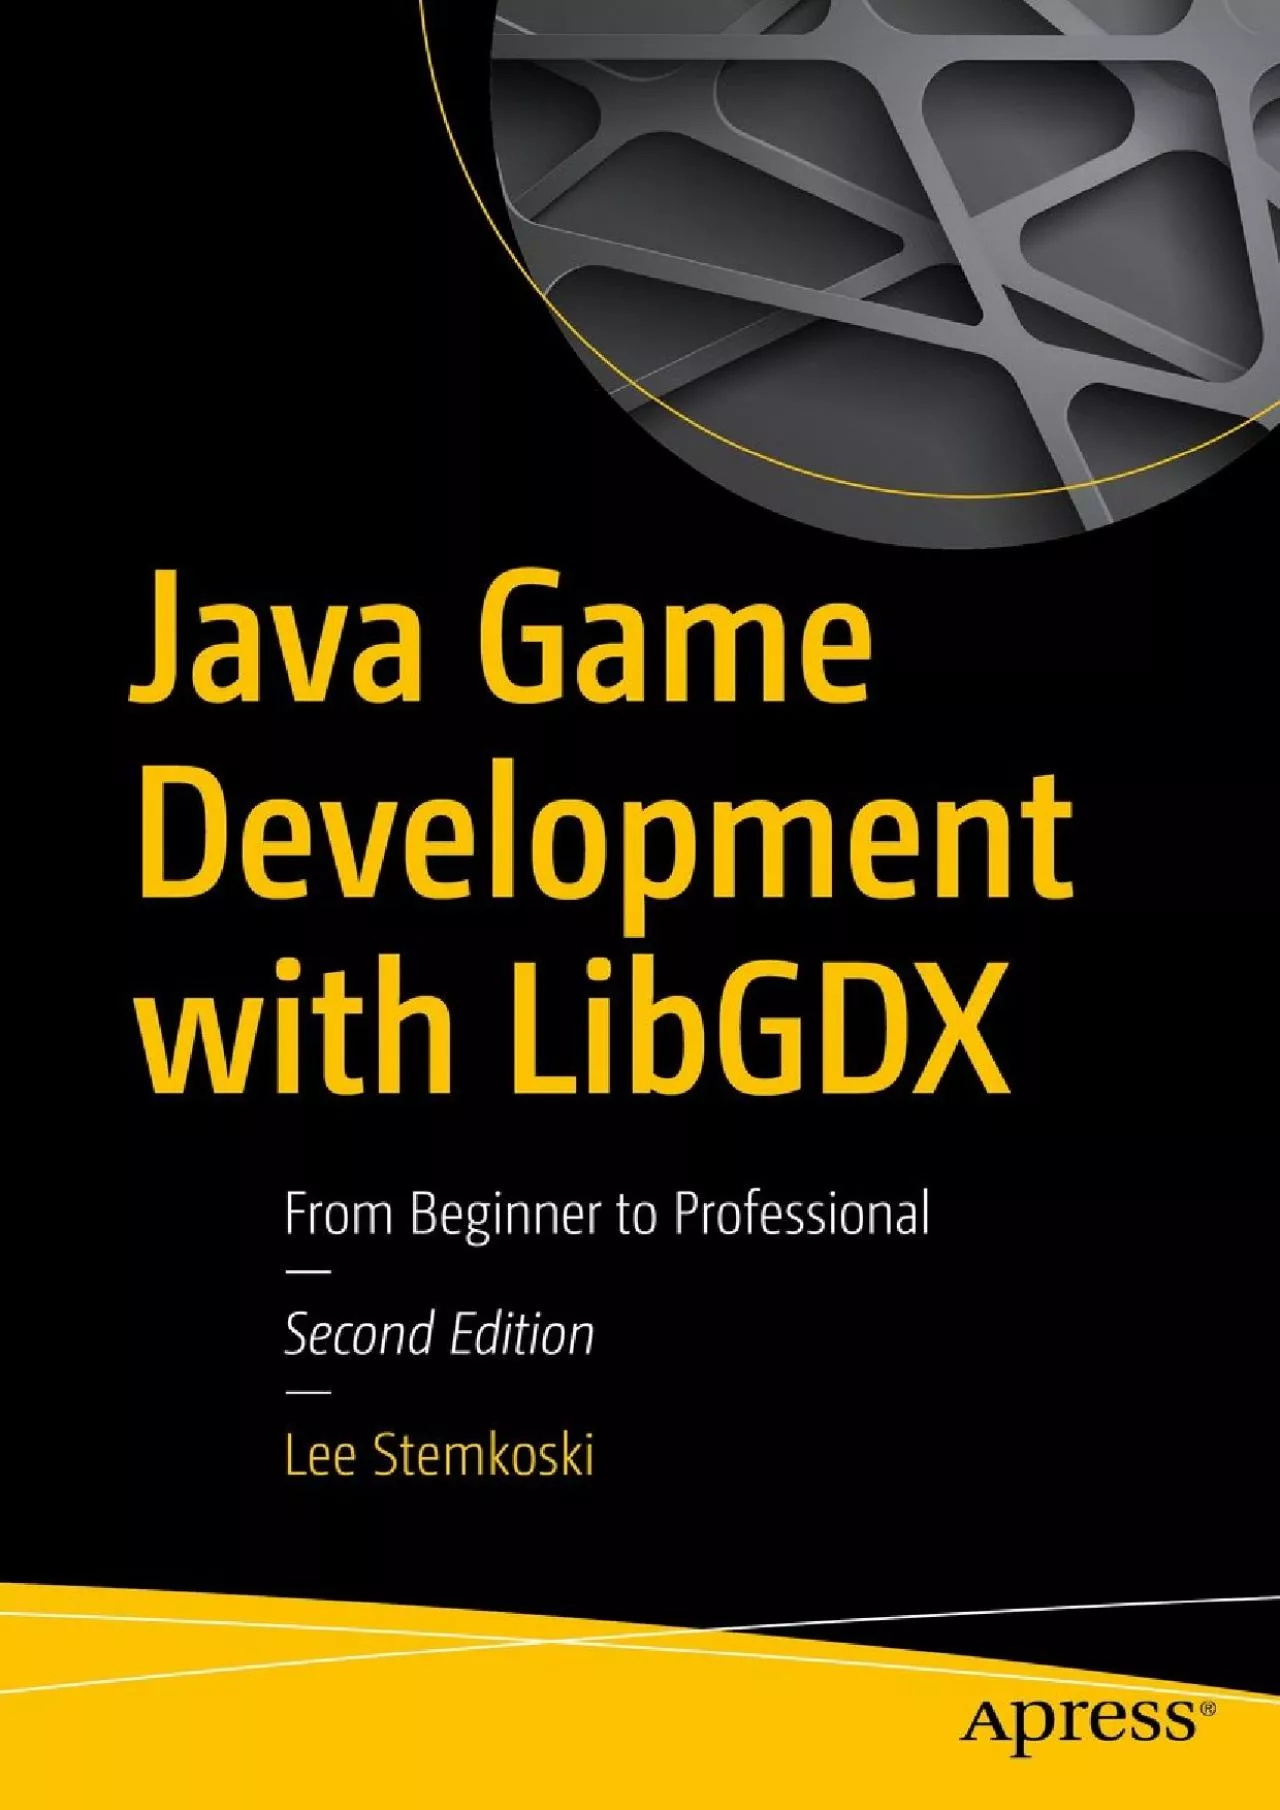 [BEST]-Java Game Development with LibGDX: From Beginner to Professional